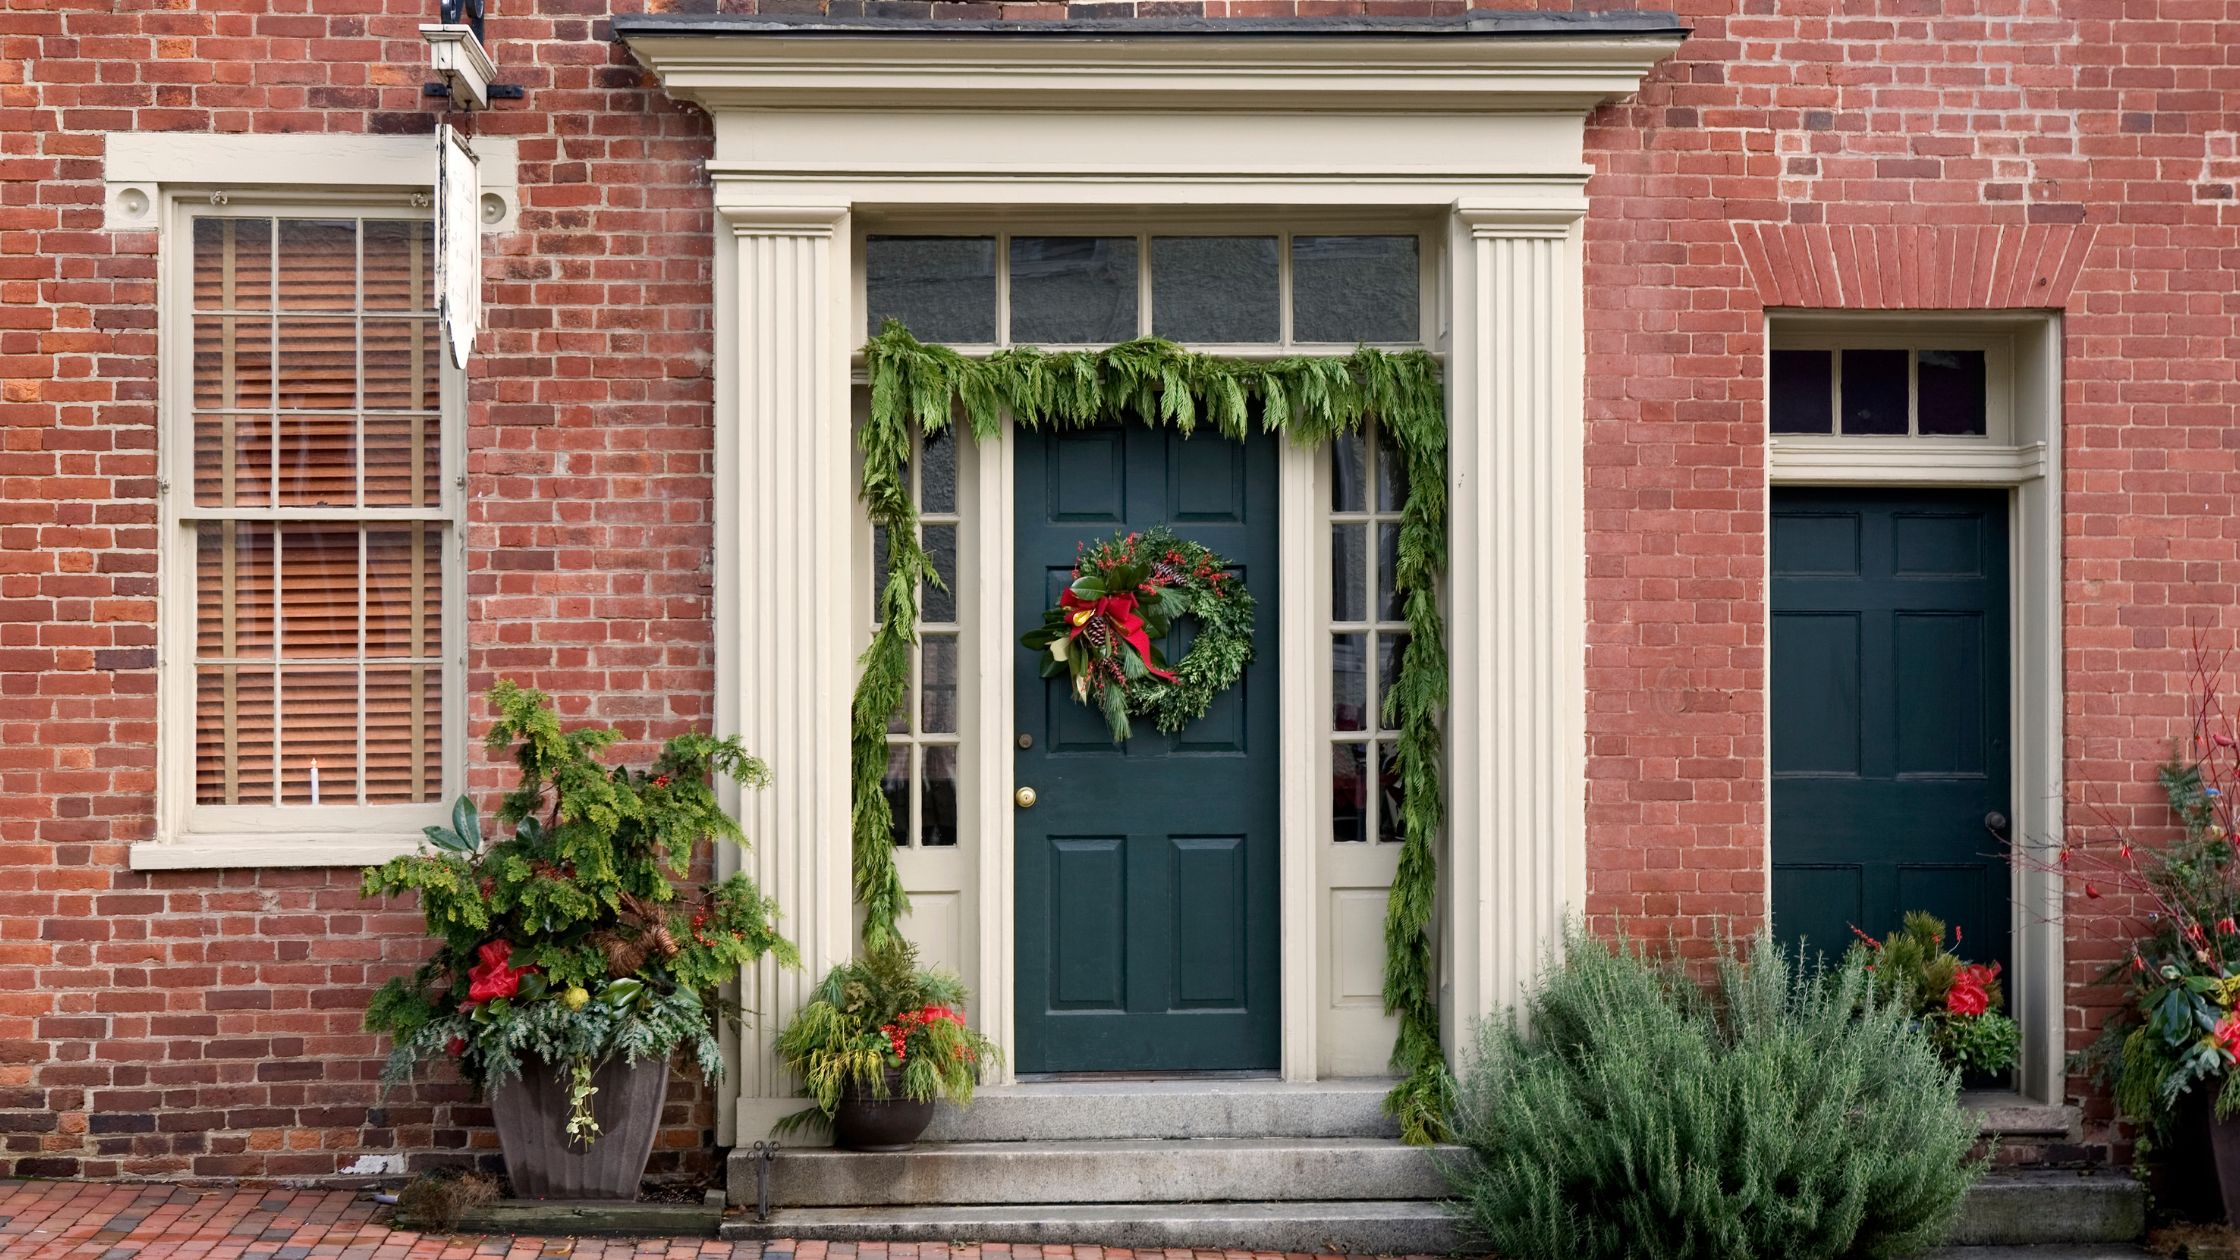 How to decorate and stage your home during the holiday season to attract potential buyers